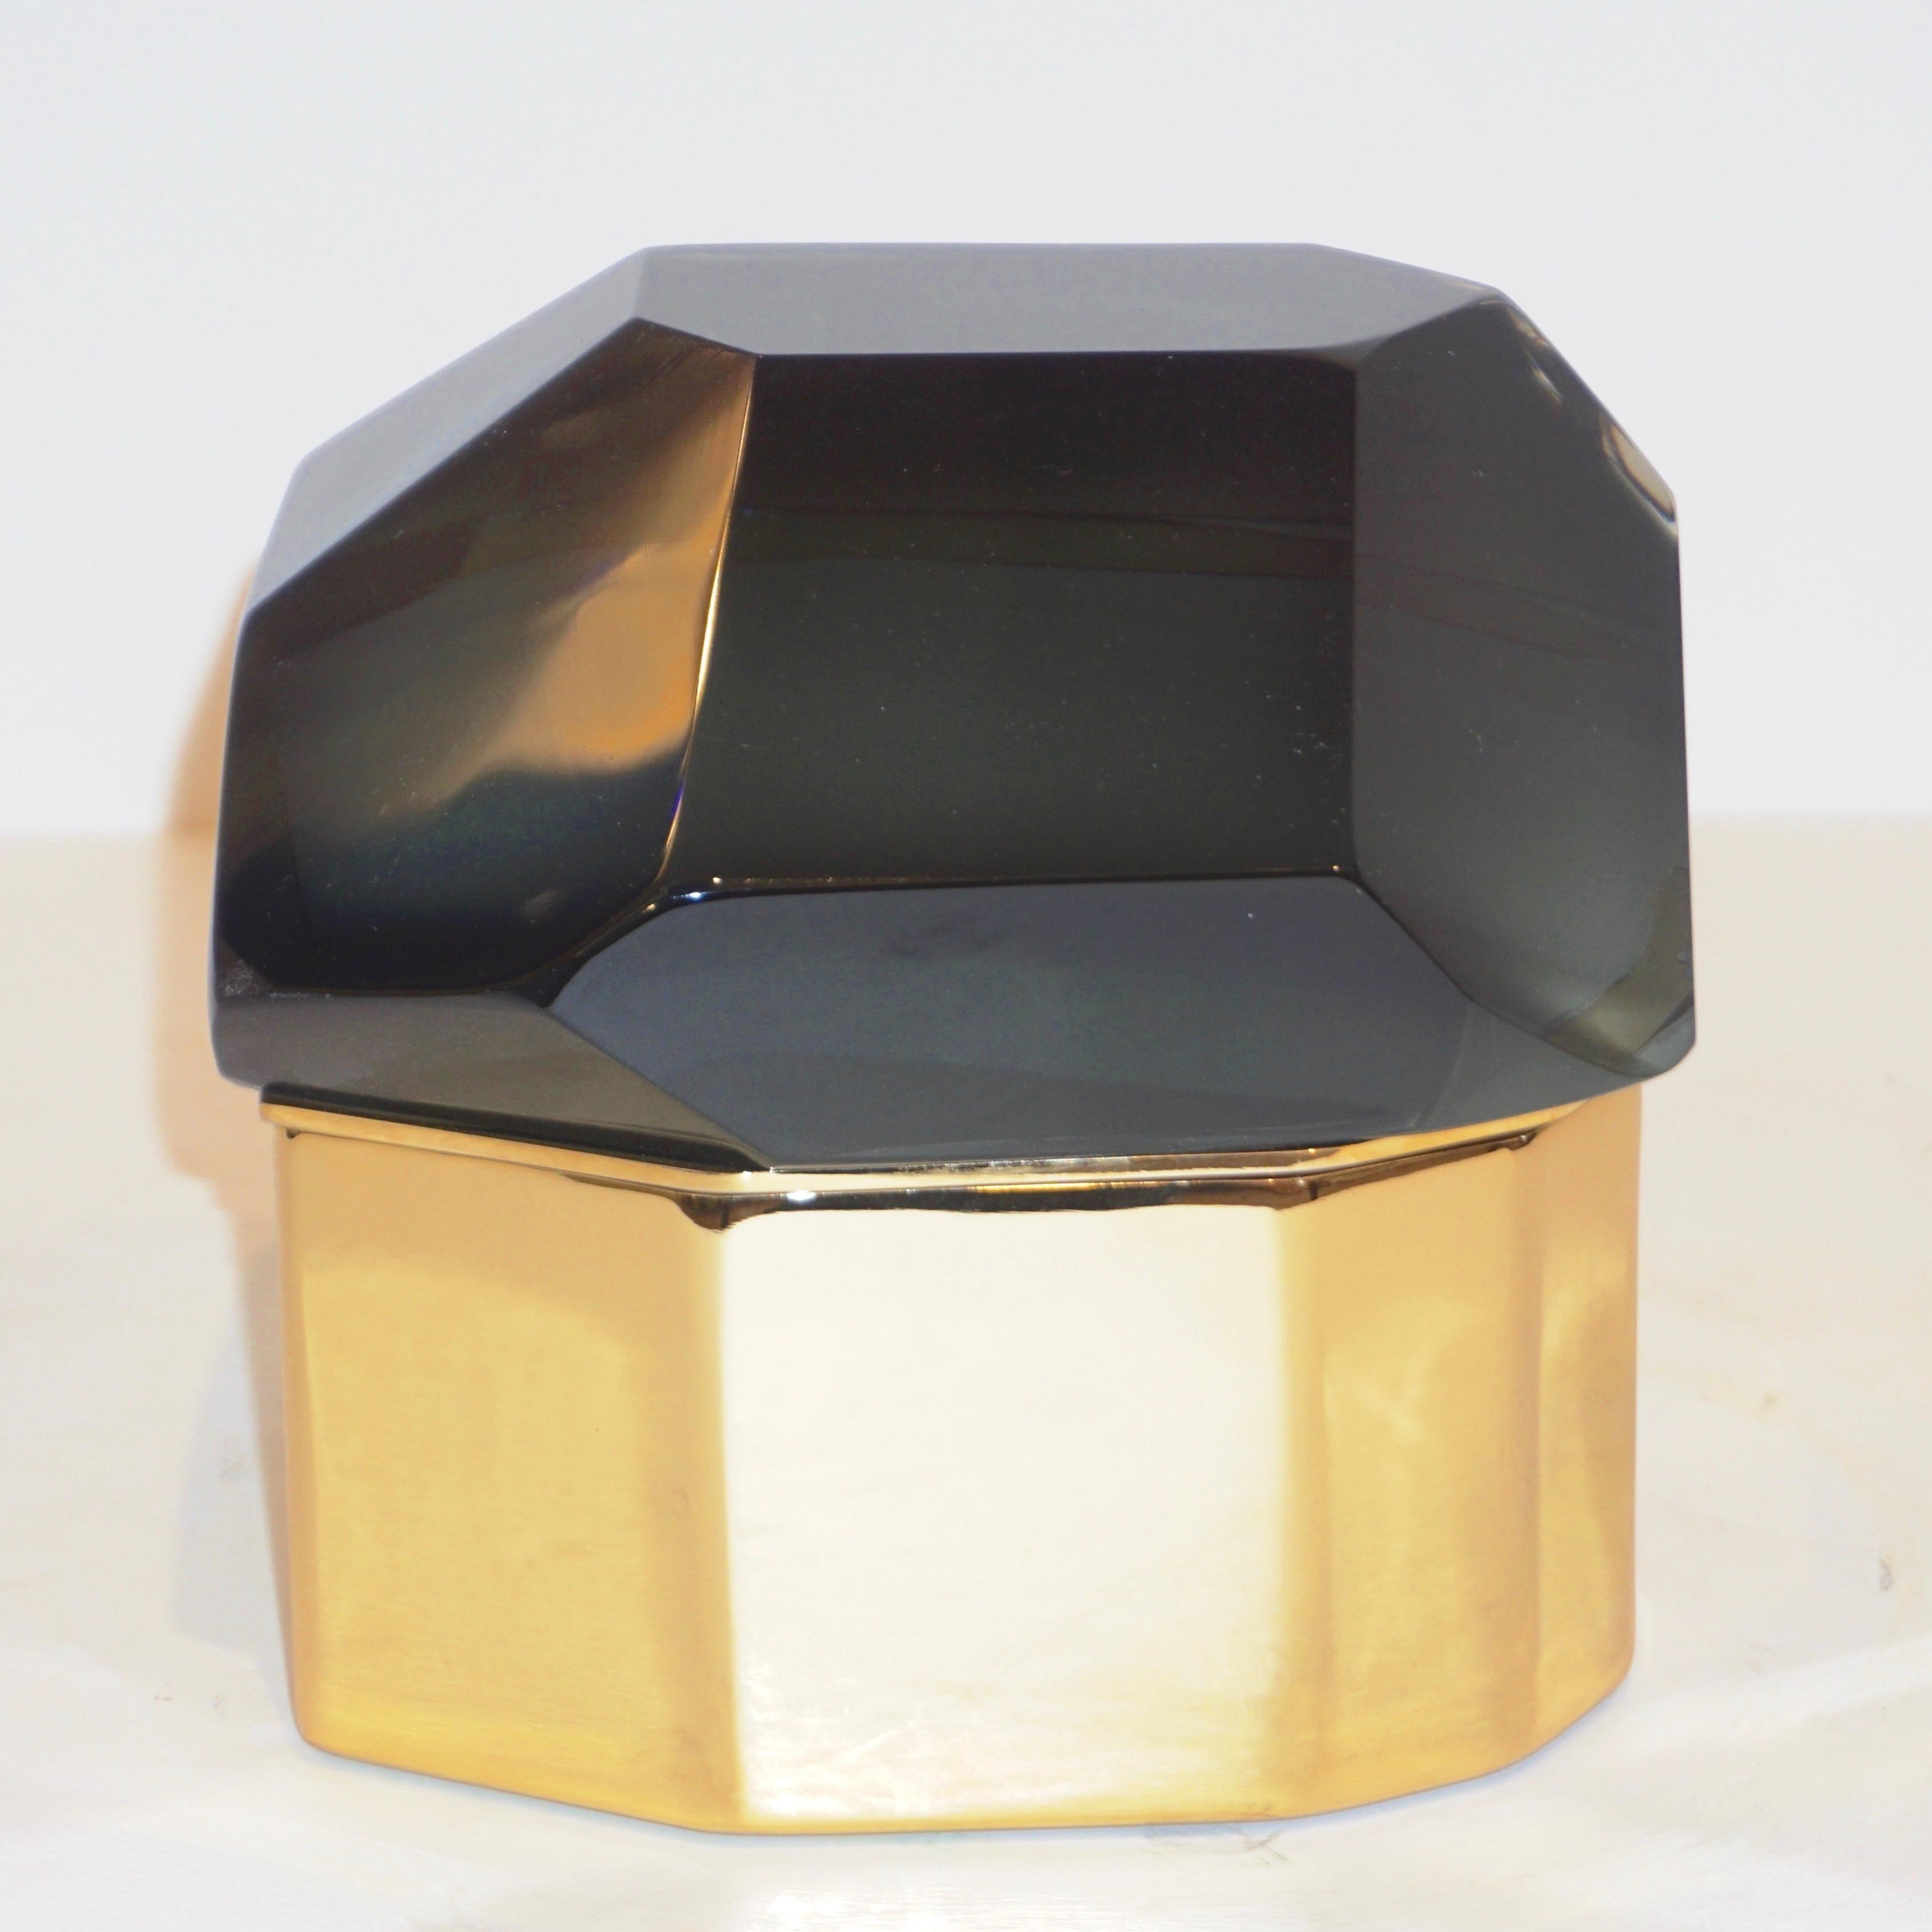 Italian contemporary organic glamorous casket, entirely handcrafted, by Toso Vetri d'Arte (Murano) with a freeform handmade geometric brass case embellished by a cover, handcut like a diamond, in a sophisticated smoked grey / transparent black blown